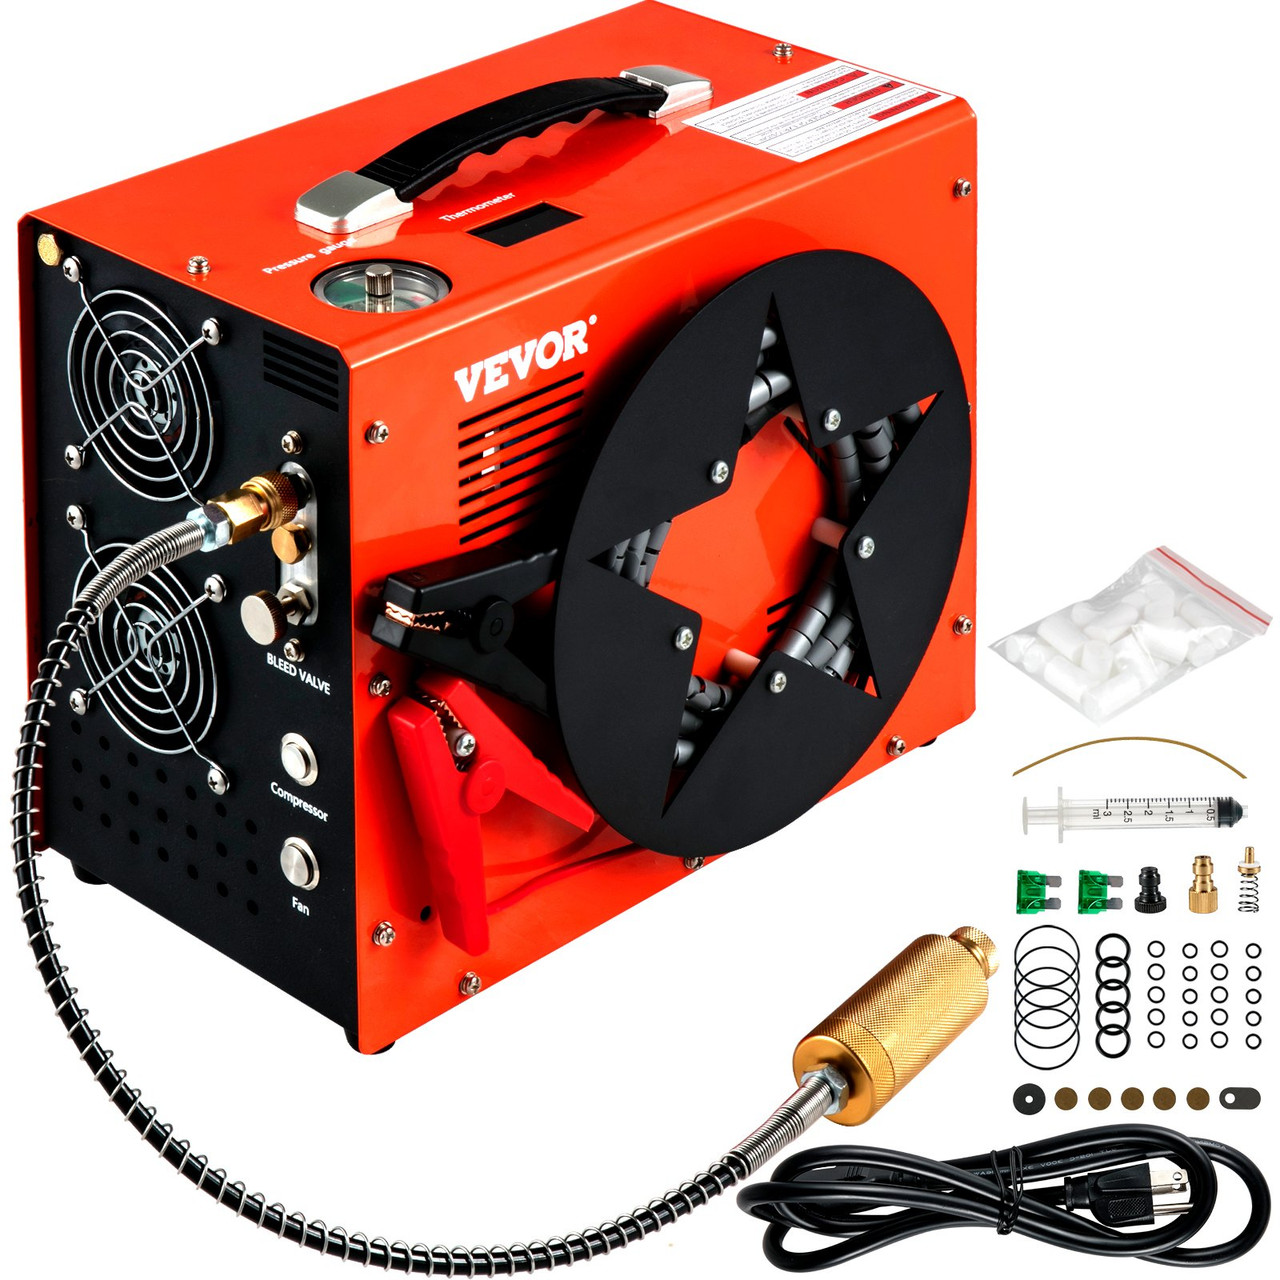 PCP Air Compressor, Auto-stop Powered by DC 12V Car or Home AC 110V/220V, 4500Psi/30Mpa/300Bar w/Built-in Water/Oil Adapter & Cooling Fan for Paintball, Scuba, Air Rifle